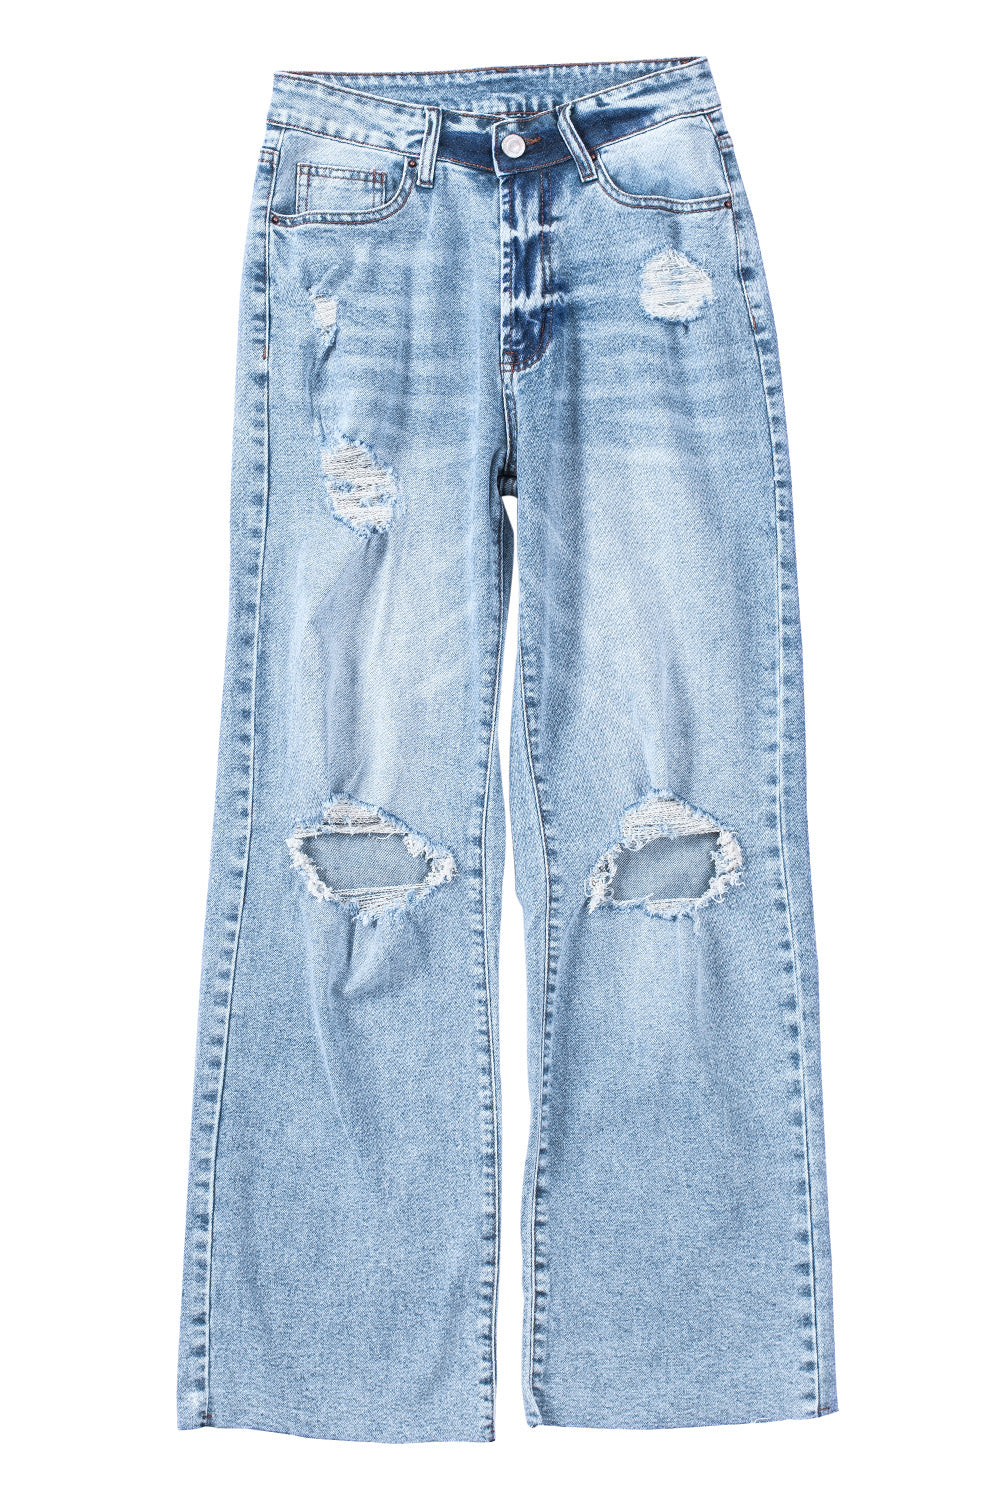 Sky Blue Distressed Hollow-out Knees Wide Leg Jeans